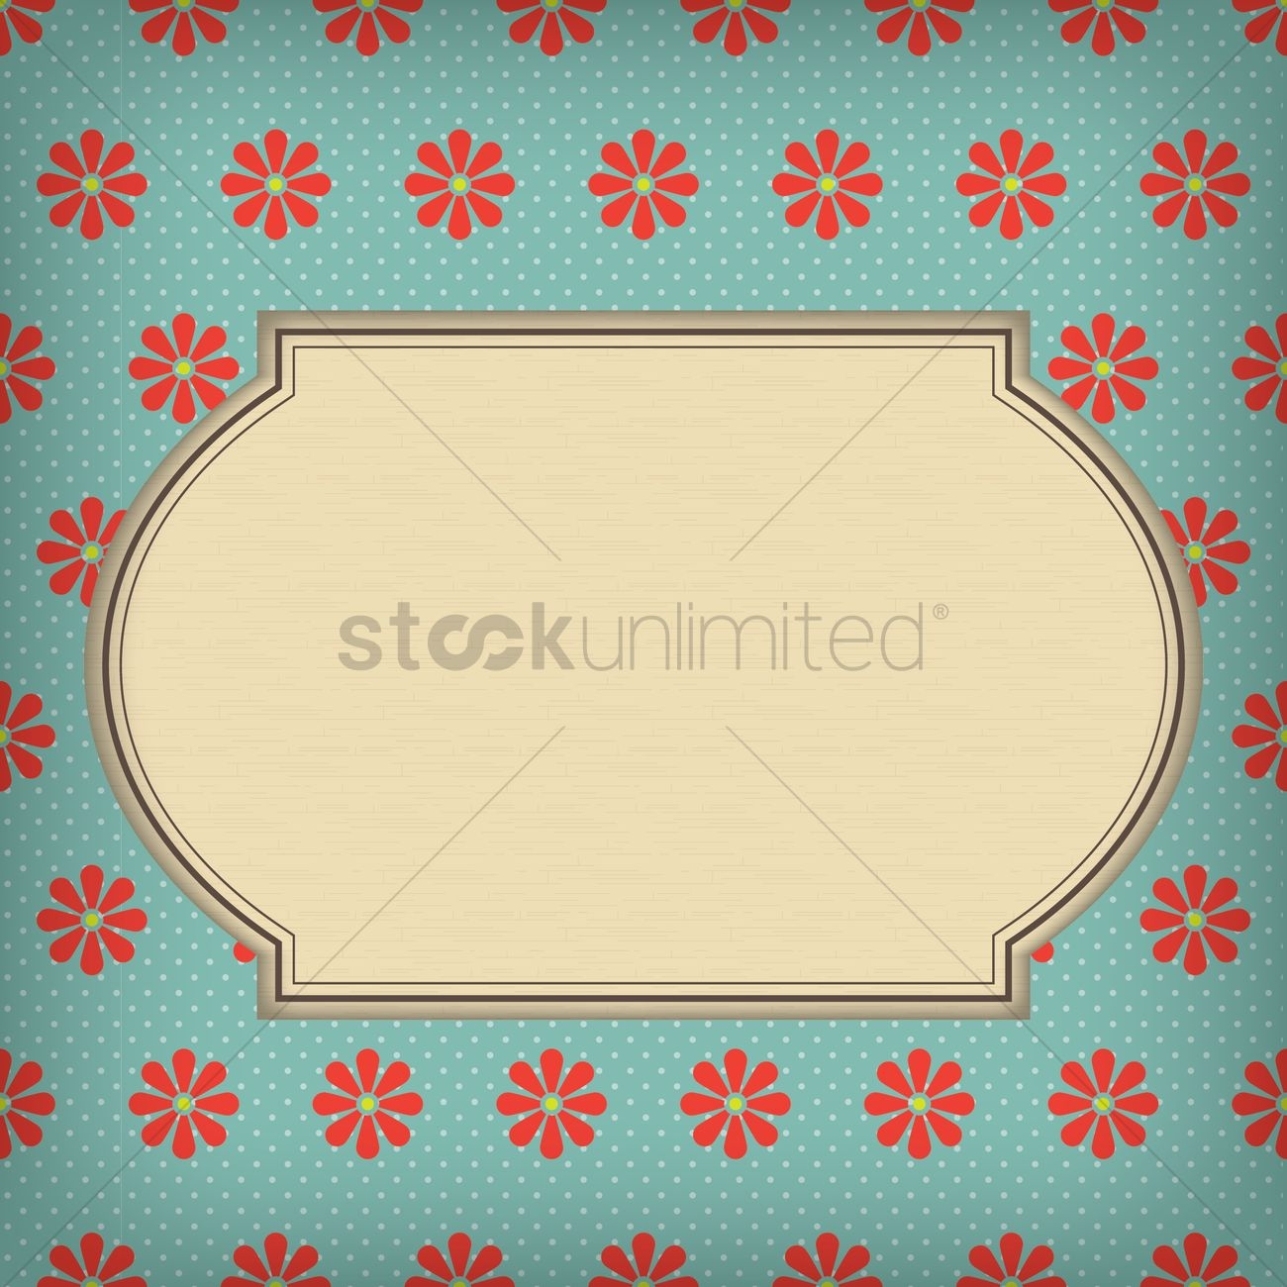 Free Greeting Card Template Design Vector Image - 1625293 | Stockunlimited Pertaining To Greeting Card Layout Templates